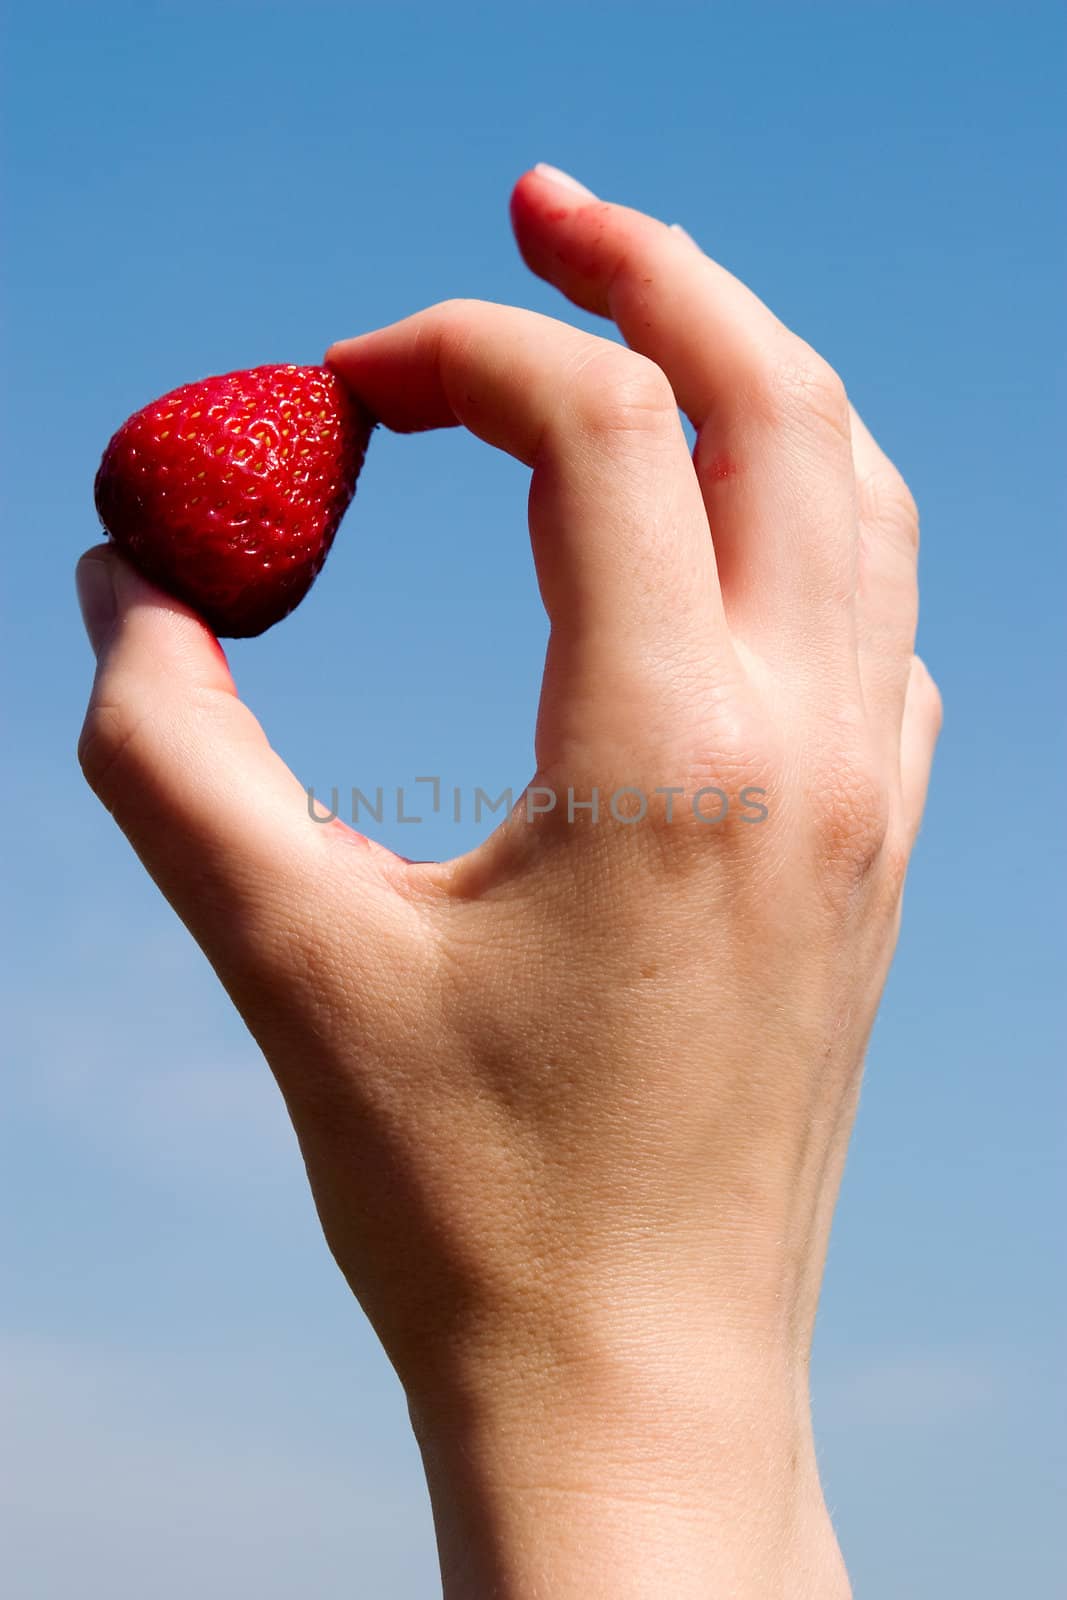 A hand holding a single strawberry against the sky